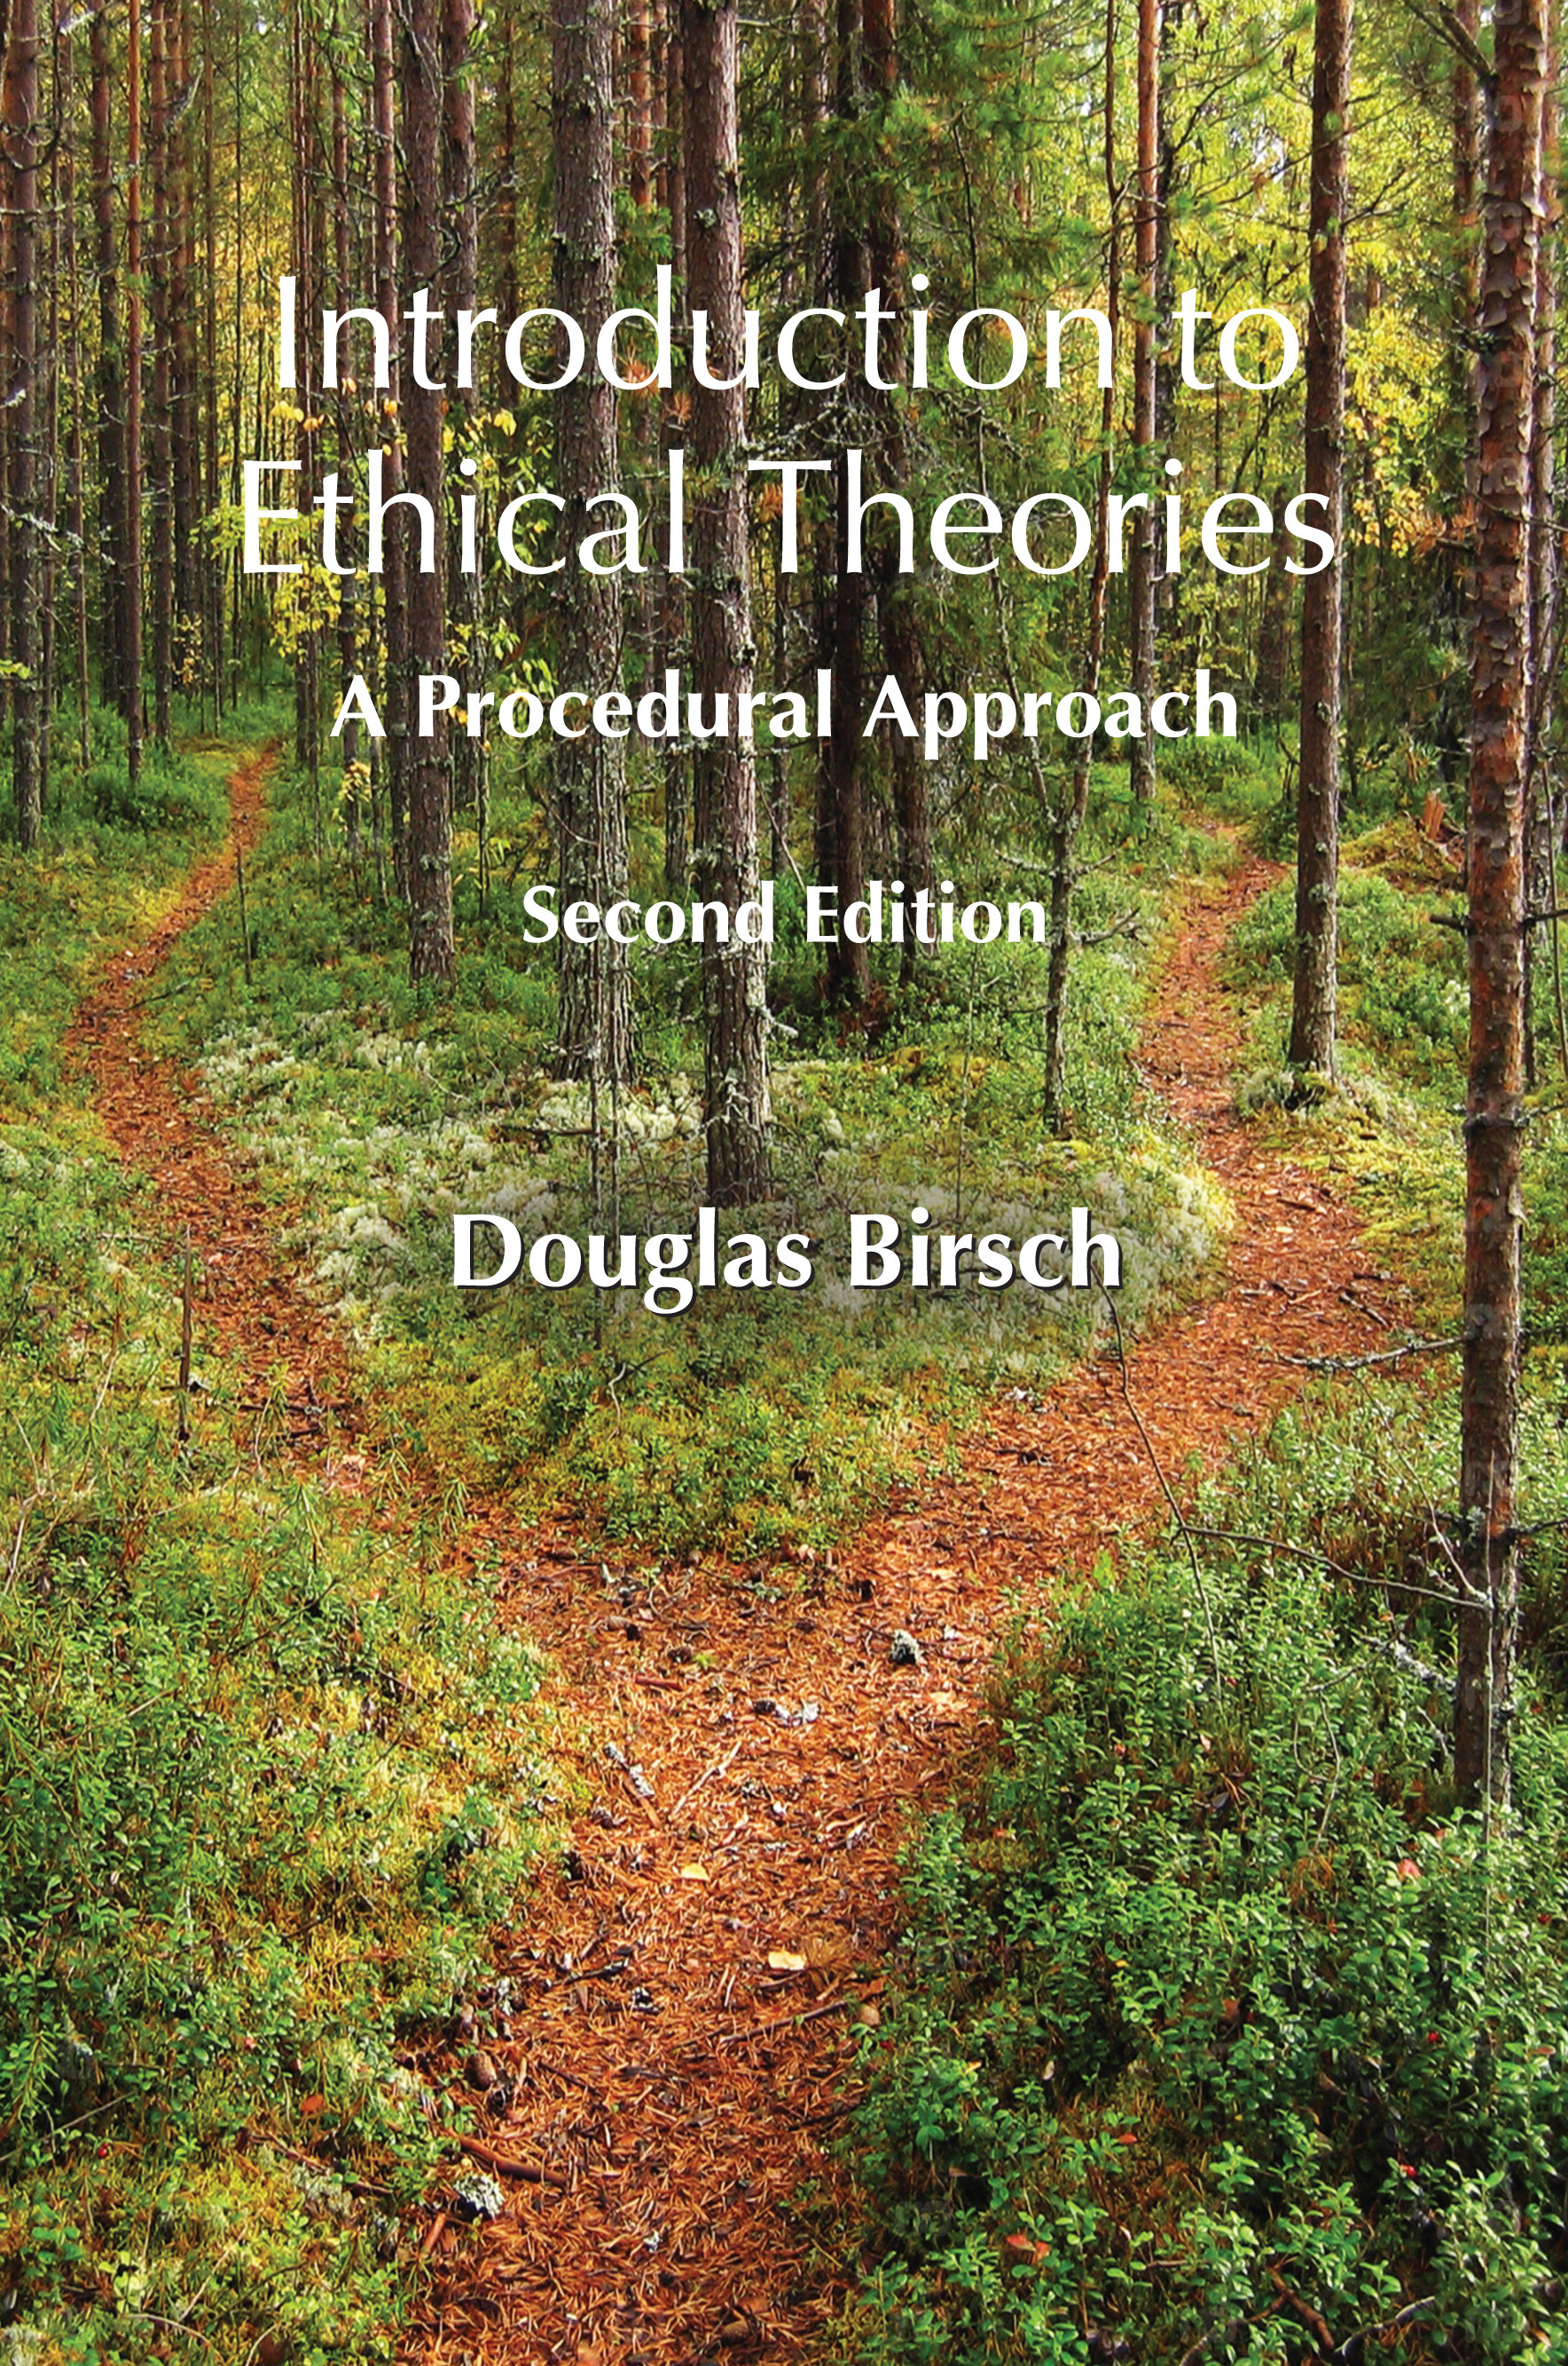 Introduction to Ethical Theories: A Procedural Approach, Second Edition by Douglas  Birsch